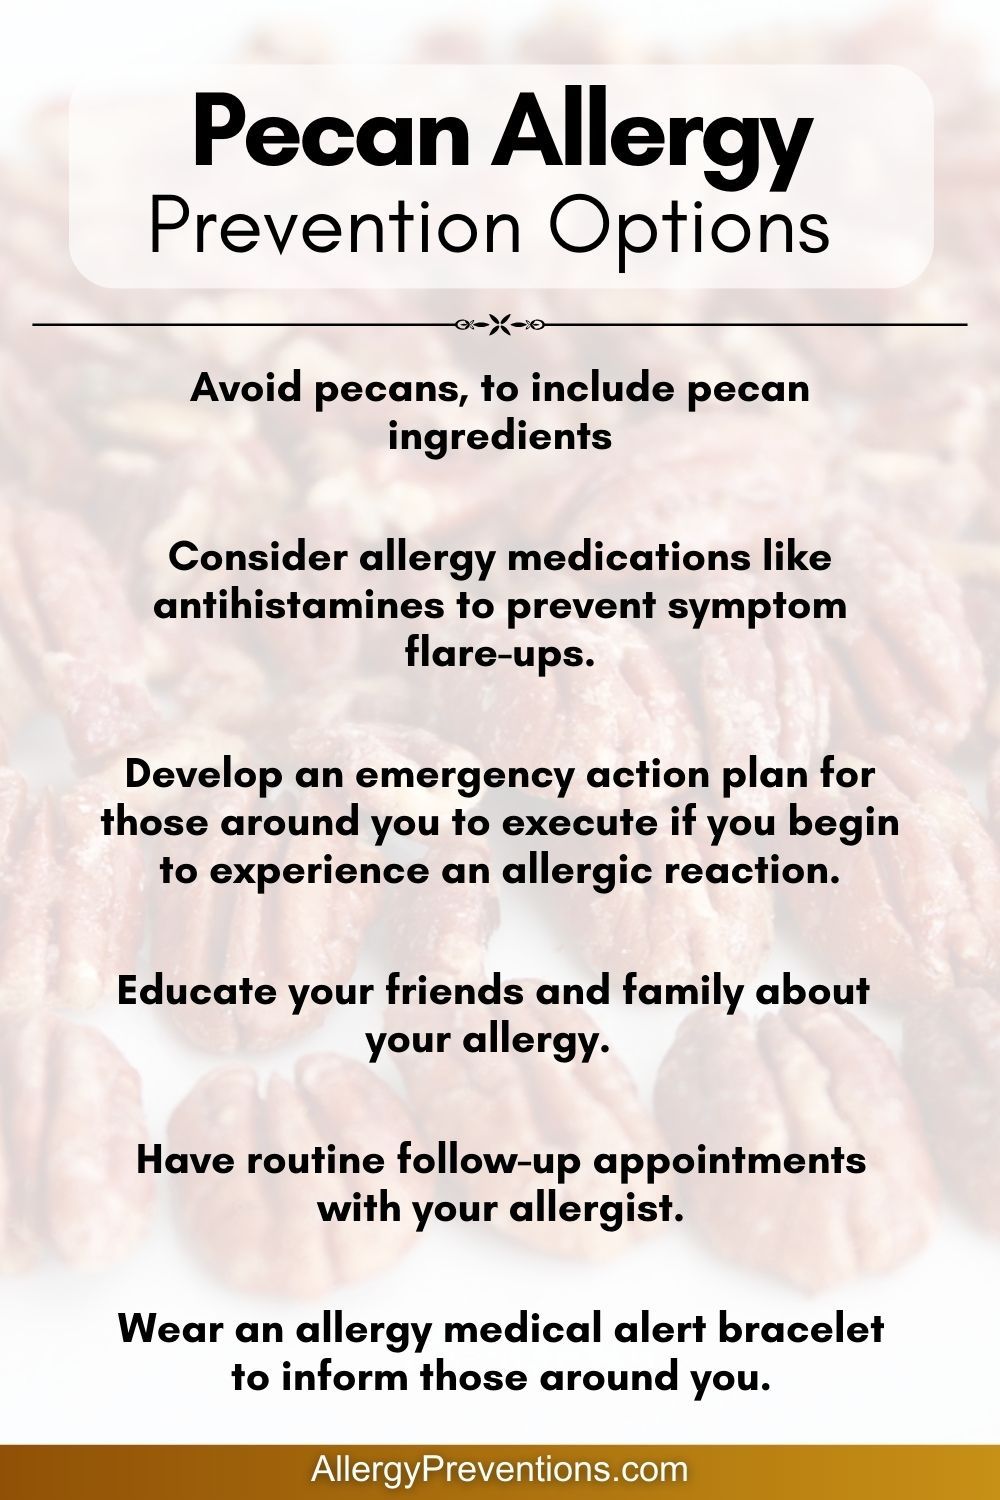 Pecan Allergy Prevention Options Infographic: Avoid pecans, to include pecan ingredients. Consider allergy medications like antihistamines to prevent symptom flare-ups. Educate your friends and family about your allergy. Develop an emergency action plan for those around you to execute if you begin to experience an allergic reaction. Have routine follow-up appointments with your allergist. Wear an allergy medical alert bracelet to inform those around you.